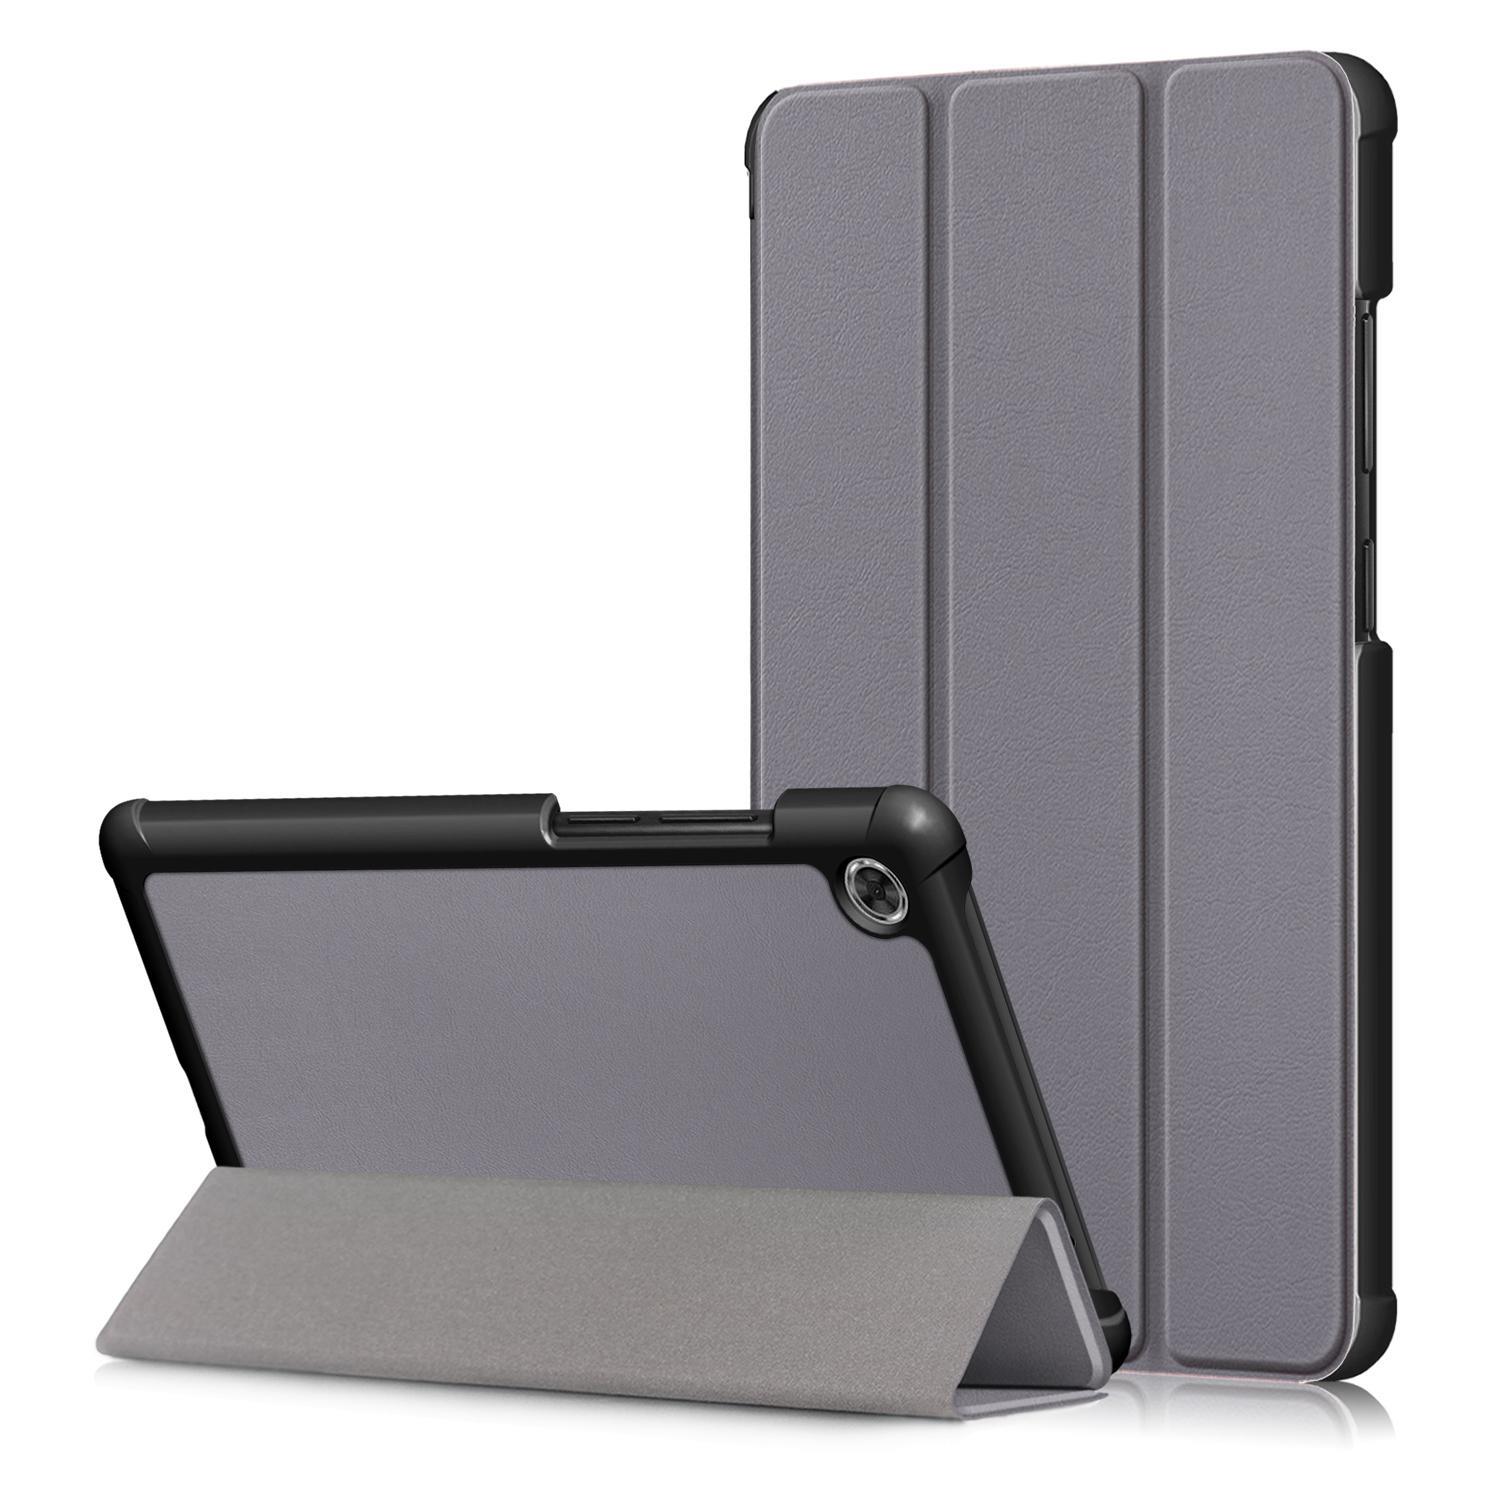 MCC For Lenovo Tab M7 3rd Gen PU Leather Case Cover TB-7306 Skin 7" M [Grey]